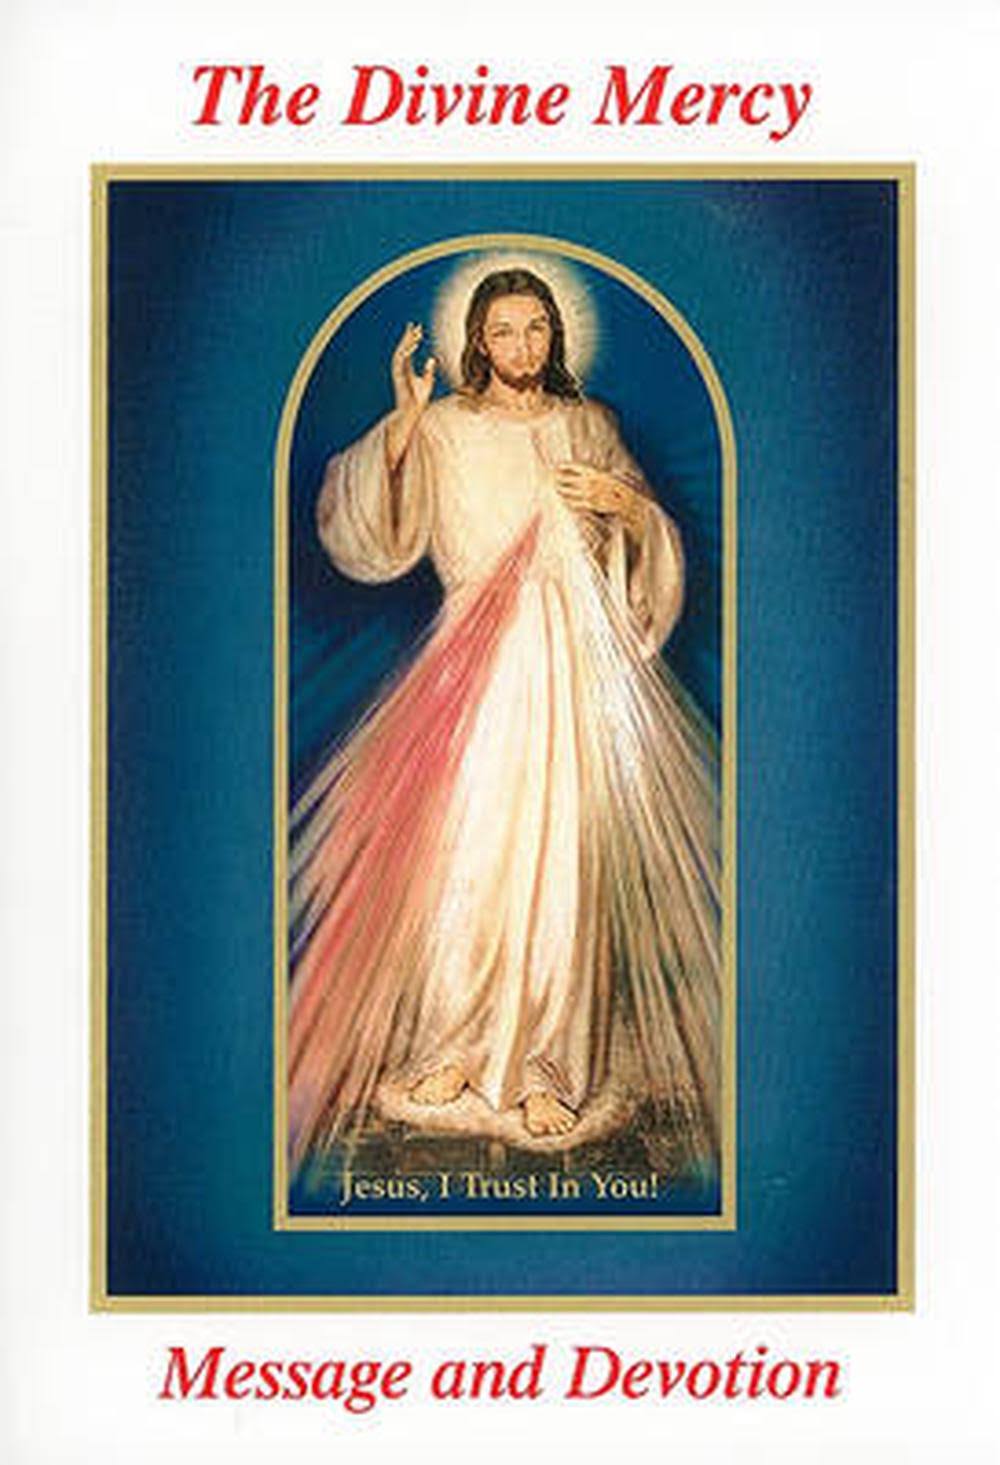 The Divine Mercy Message and Devotion: With Selected Prayers from the Diary of St. Maria Faustina Kowalska - Marian Press